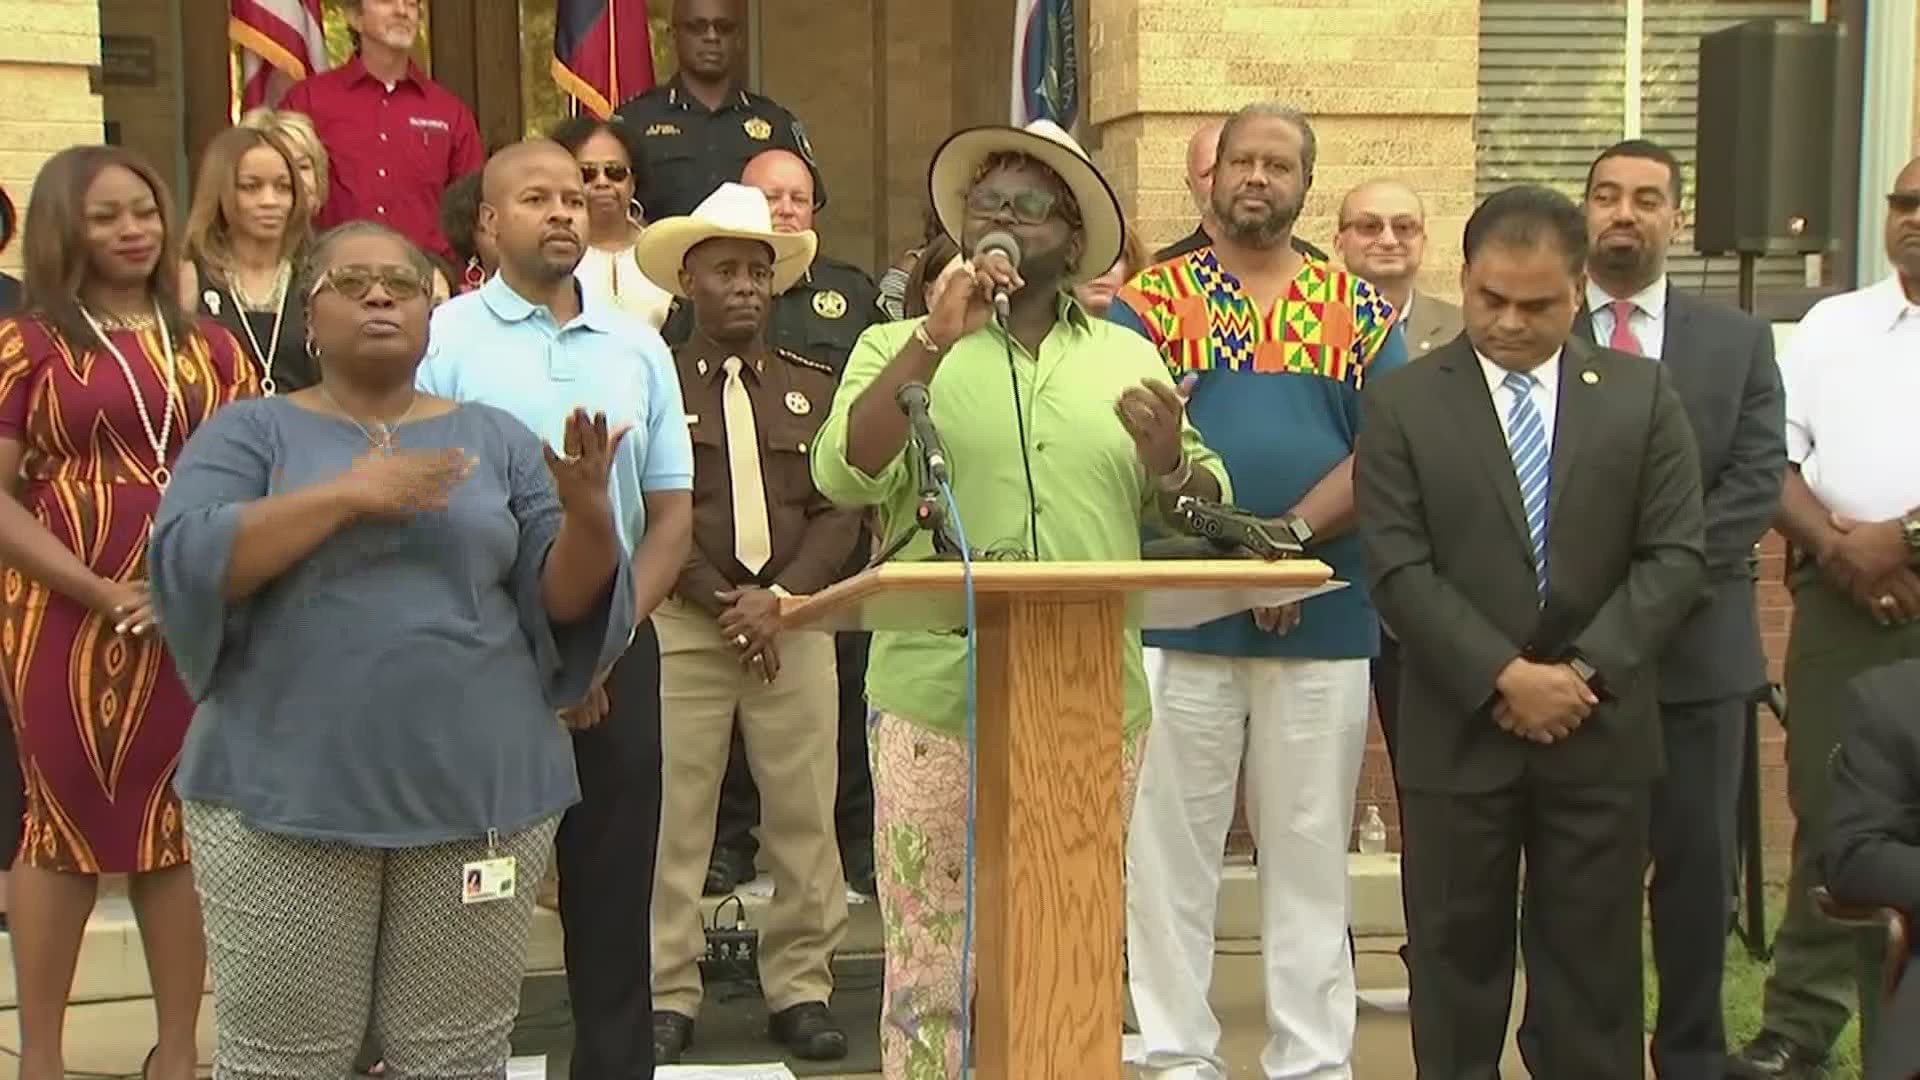 For the second straight year, the City of Houston will not be having its Juneteenth parade - because of COVID. But there are still many celebrations happening.